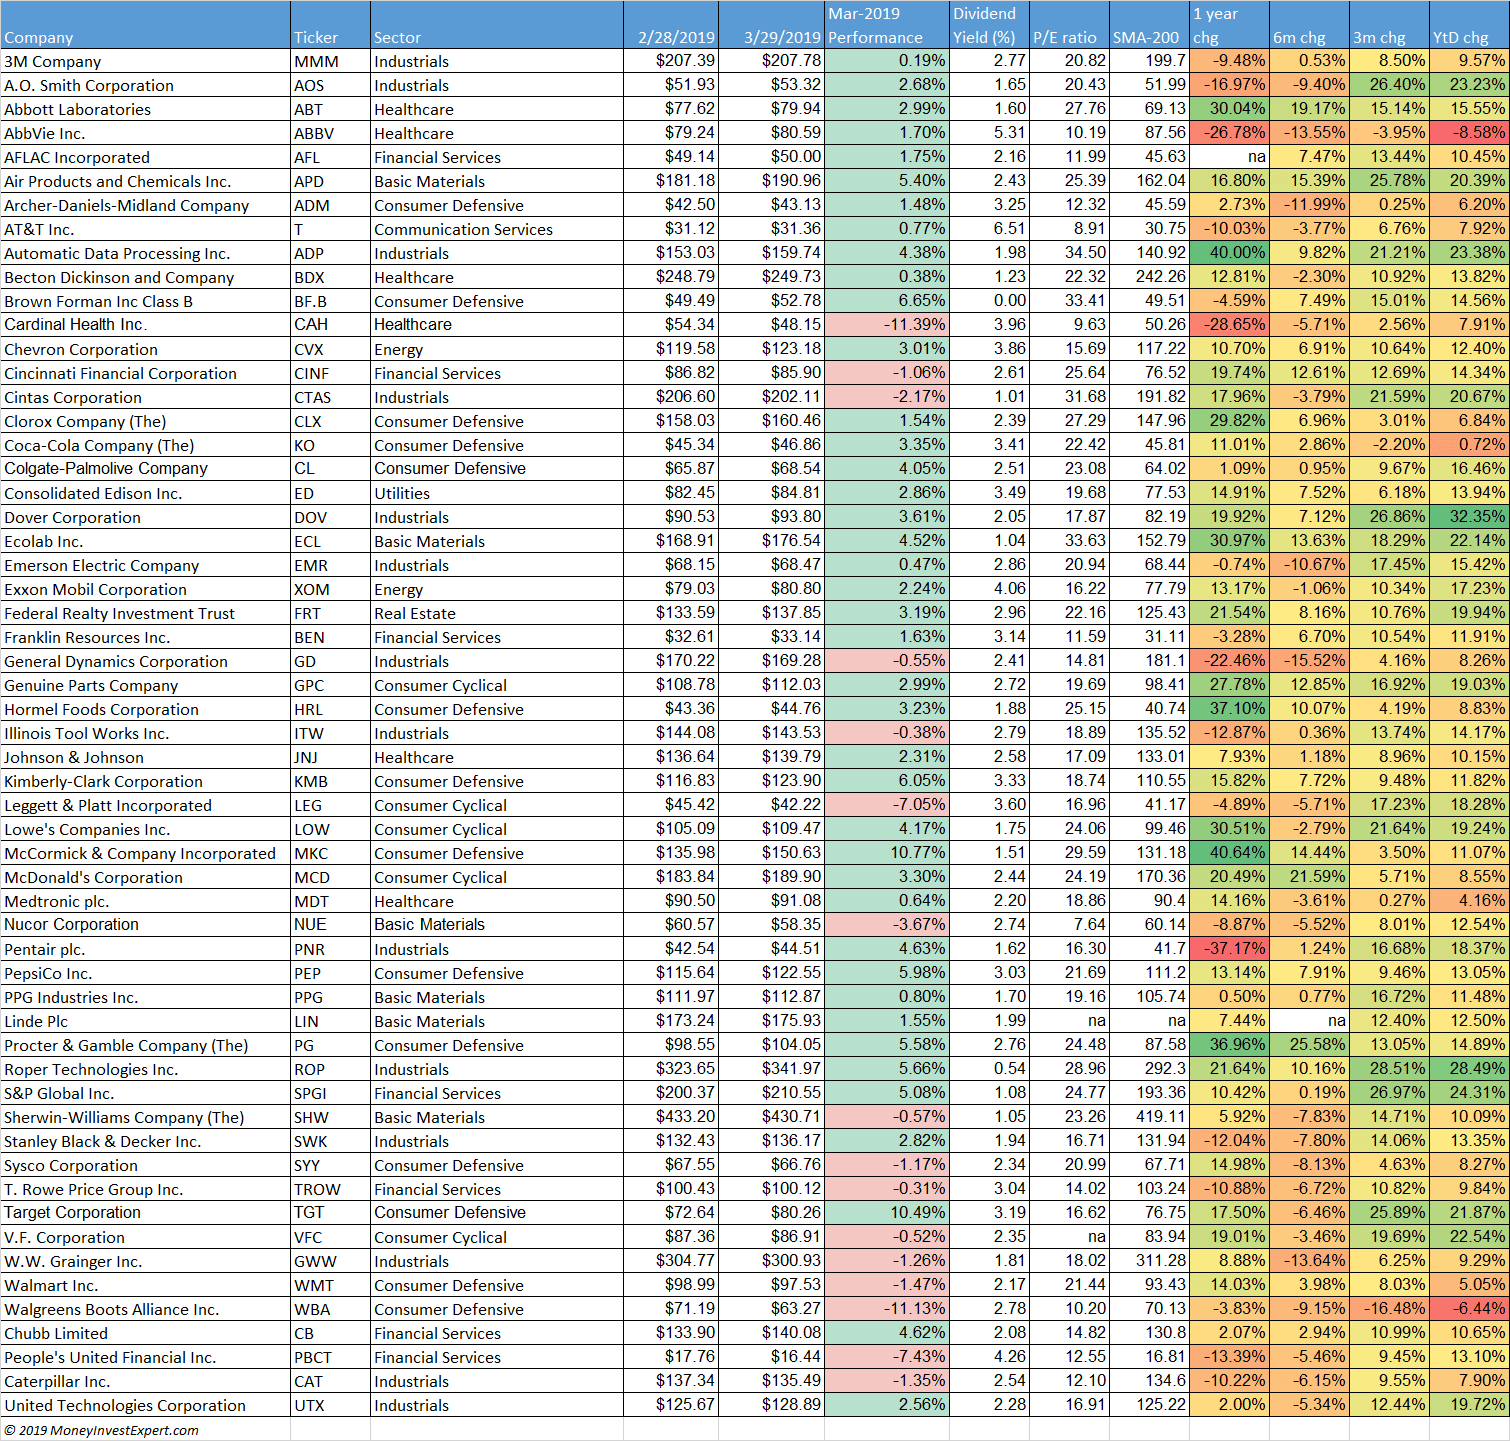 dividend-aristocrats-performance-march-2019